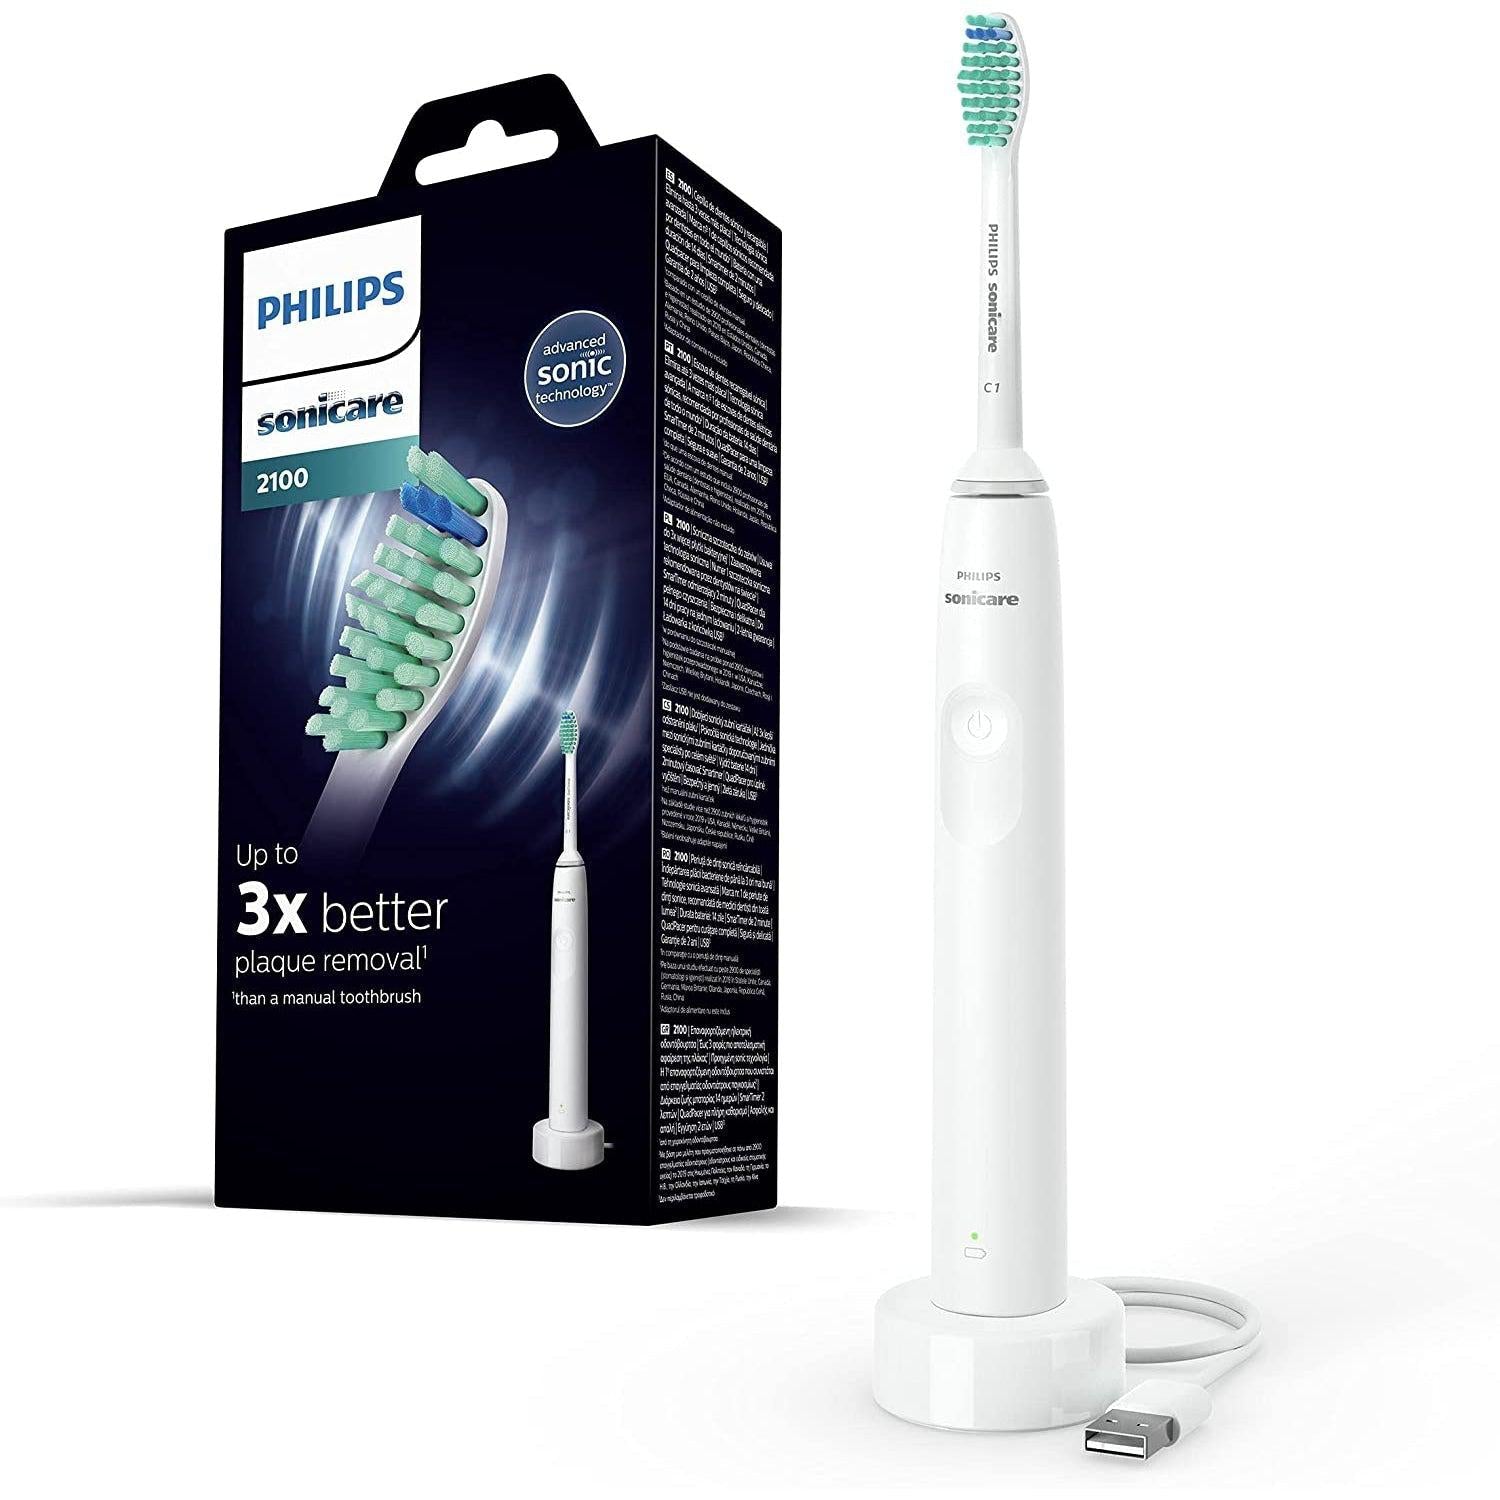 Philips HX3651/13 Series 2100 Sonic Electric Toothbrush - White - Healthxpress.ie